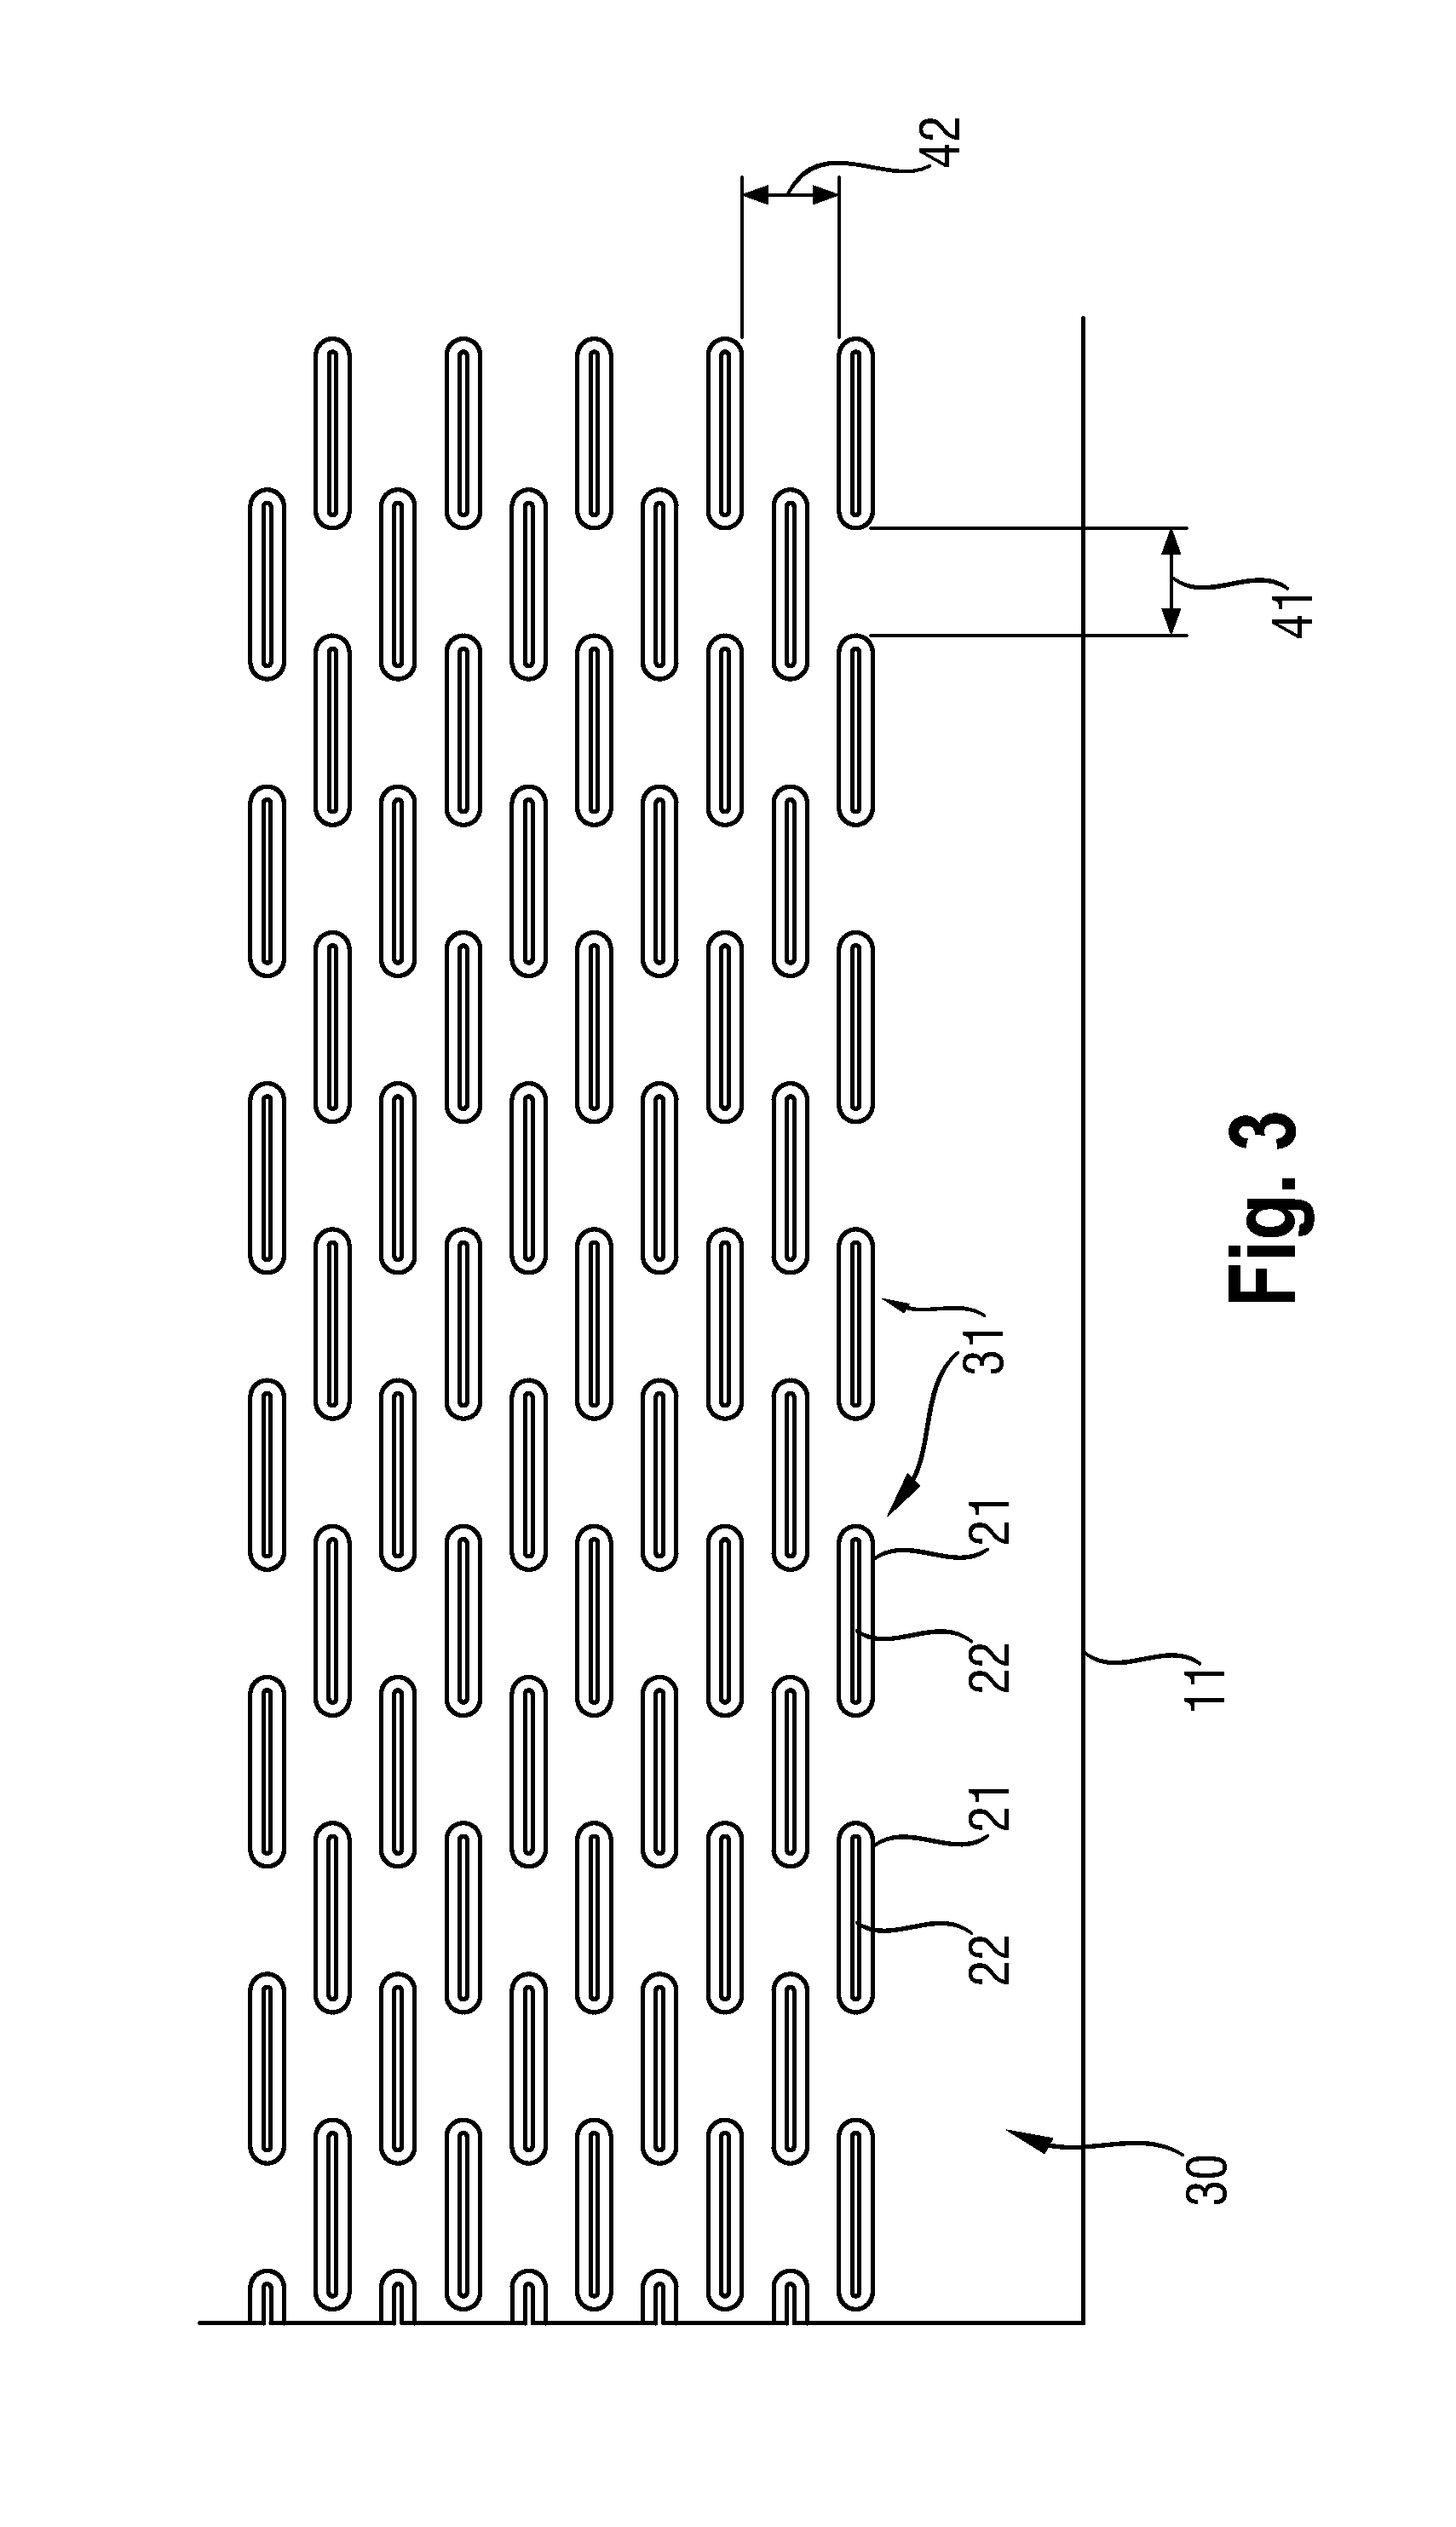 Method for producing a double-layer or triple-layer sound-absorbing panel and corresponding sound-absorbing panel